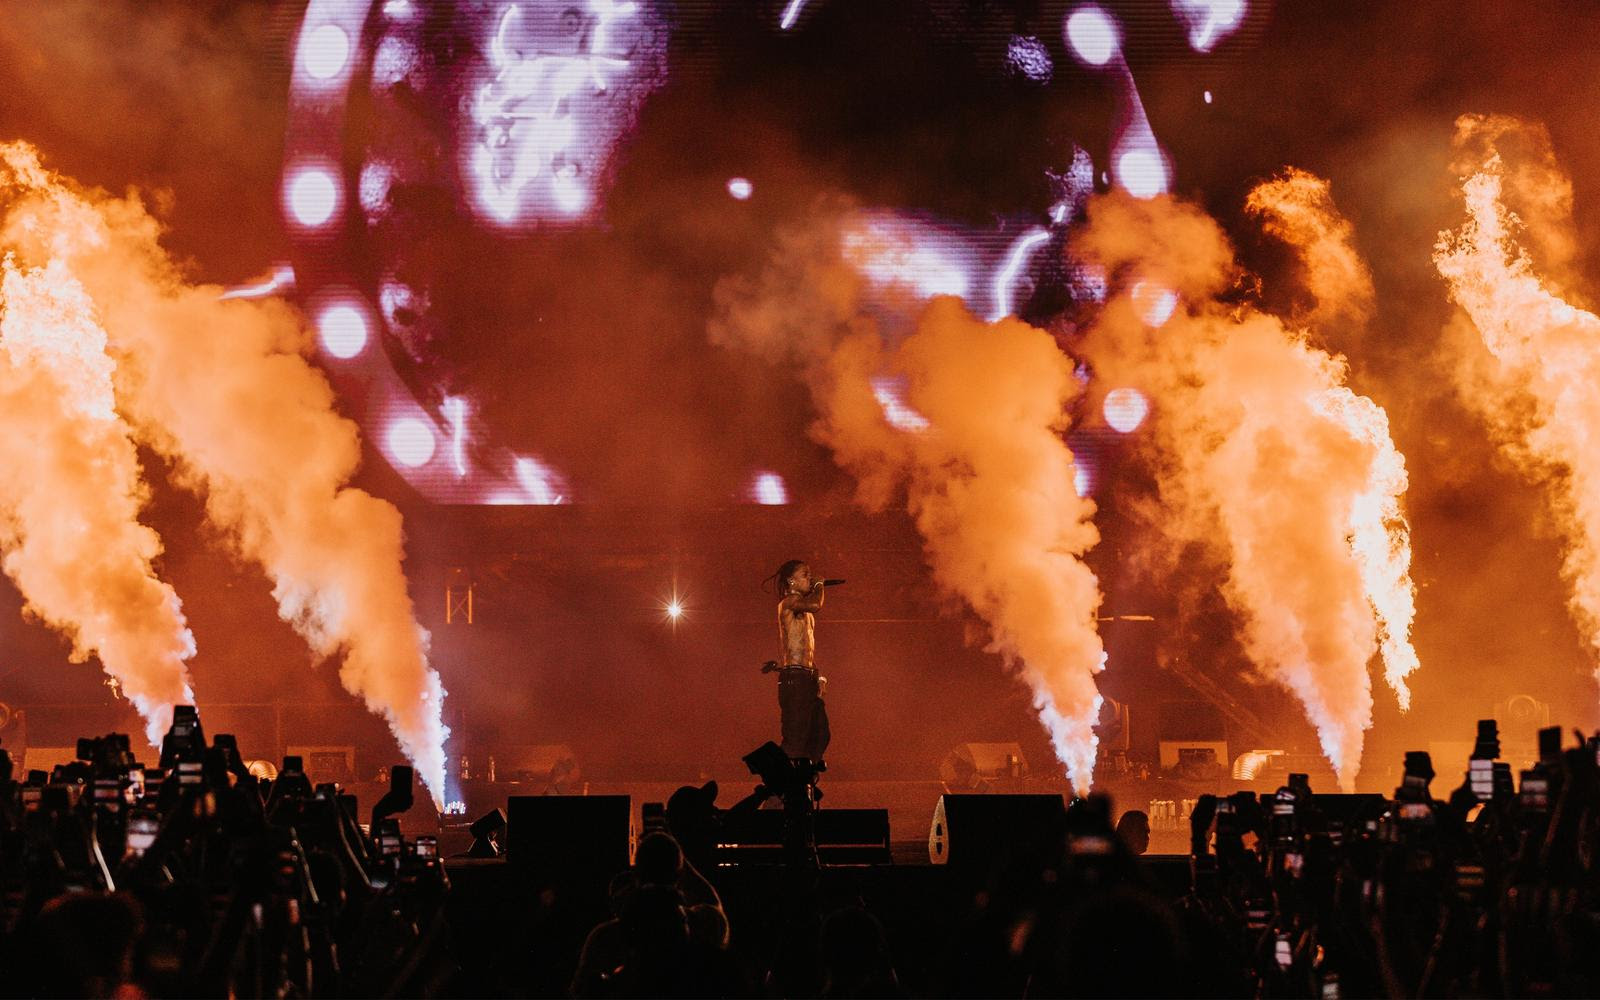 Hip-Hop Festival Rolling Loud Is Heading To Thailand In 2023